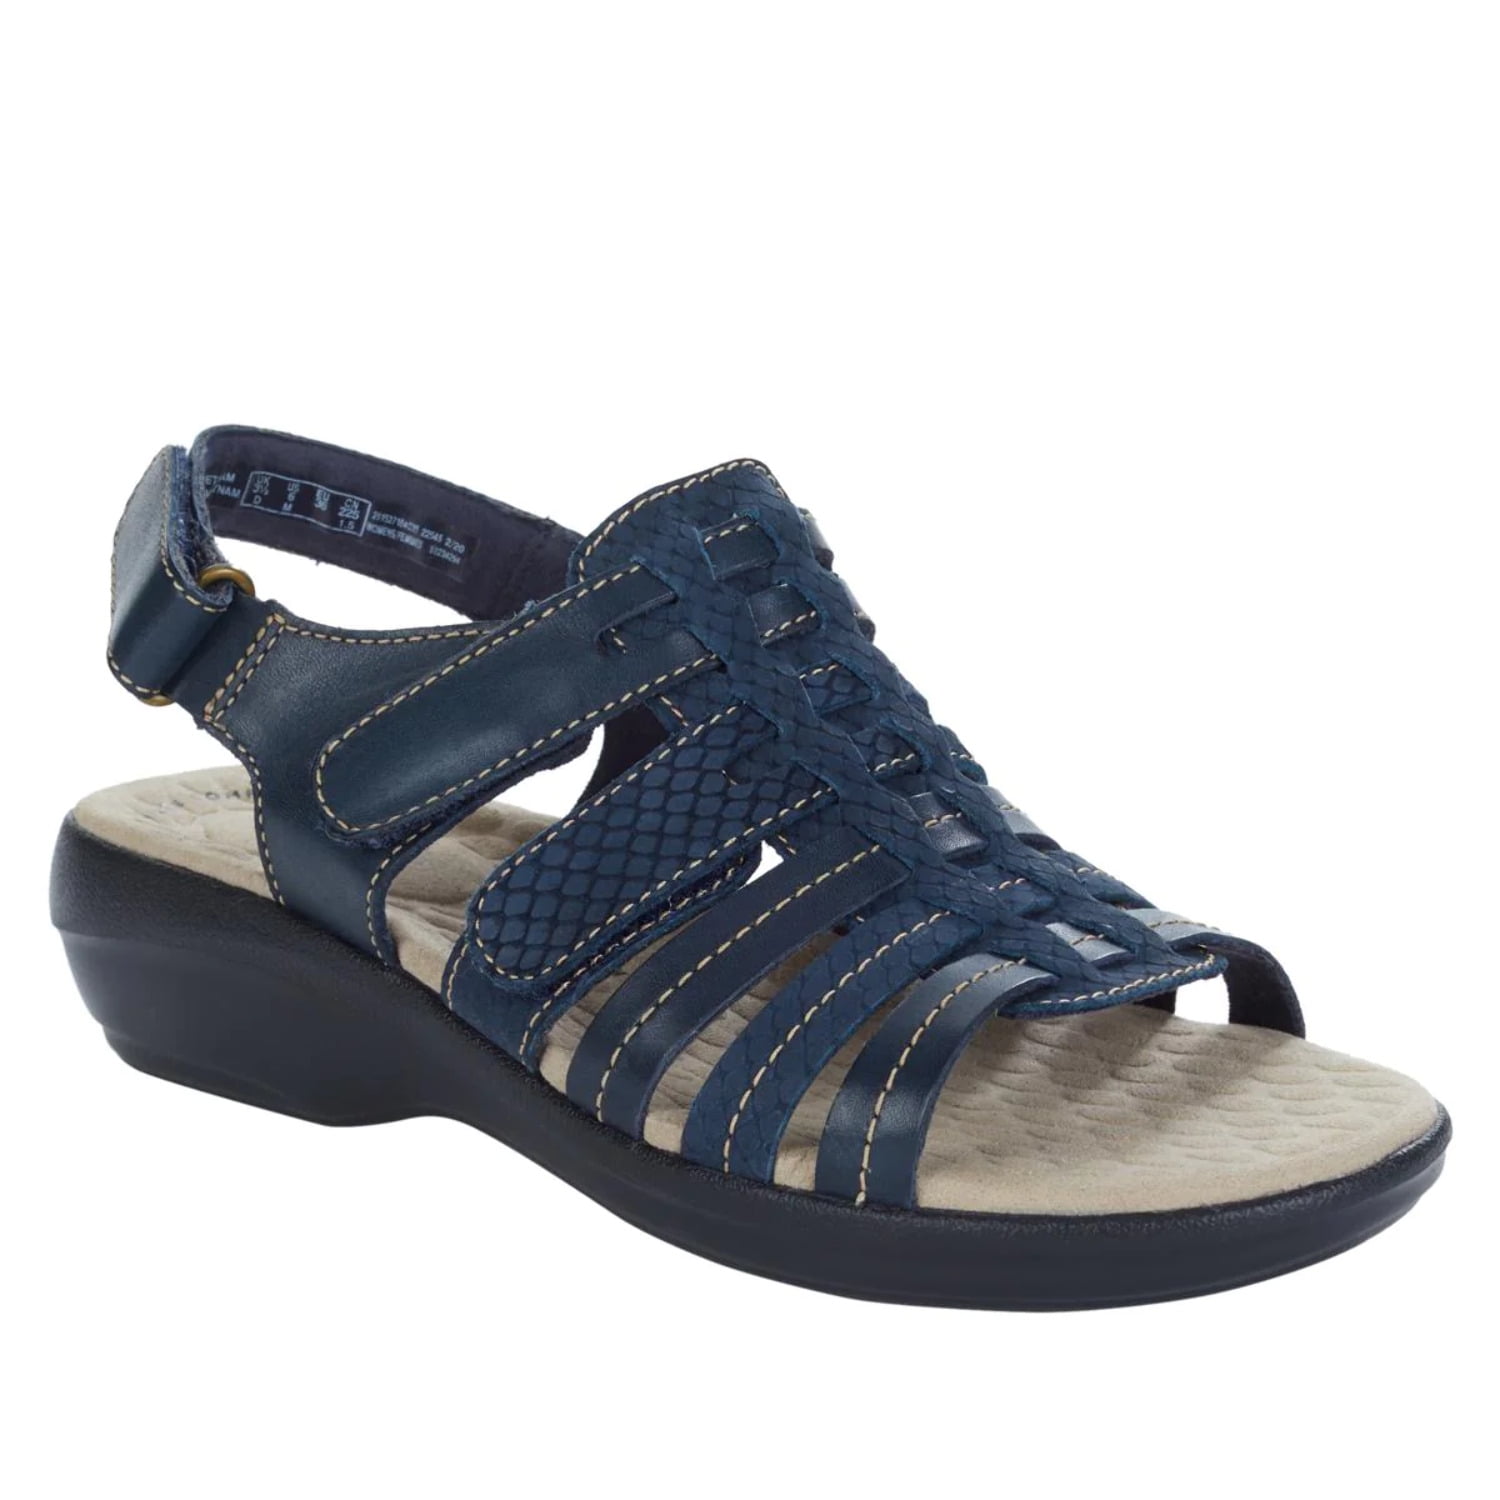 Clarks Collection Alexis Blossom Leather Sandal - Walmart.com